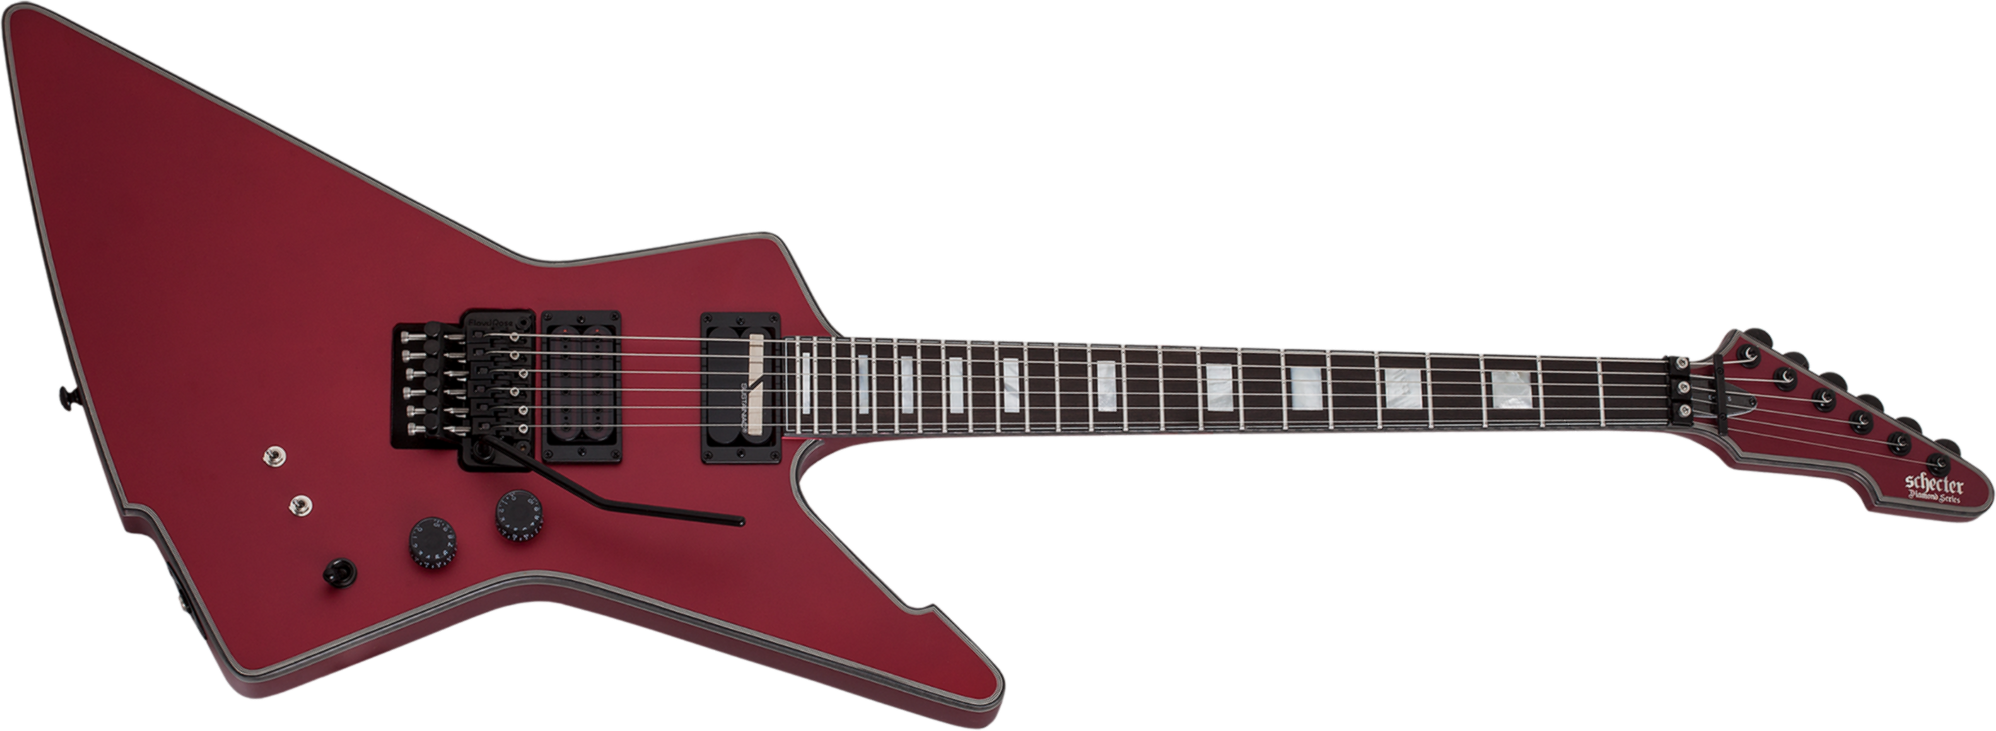 Schecter E-1 Fr S Special Edition 2h Sustainiac Fr Eb - Satin Candy Apple Red - Metal electric guitar - Main picture